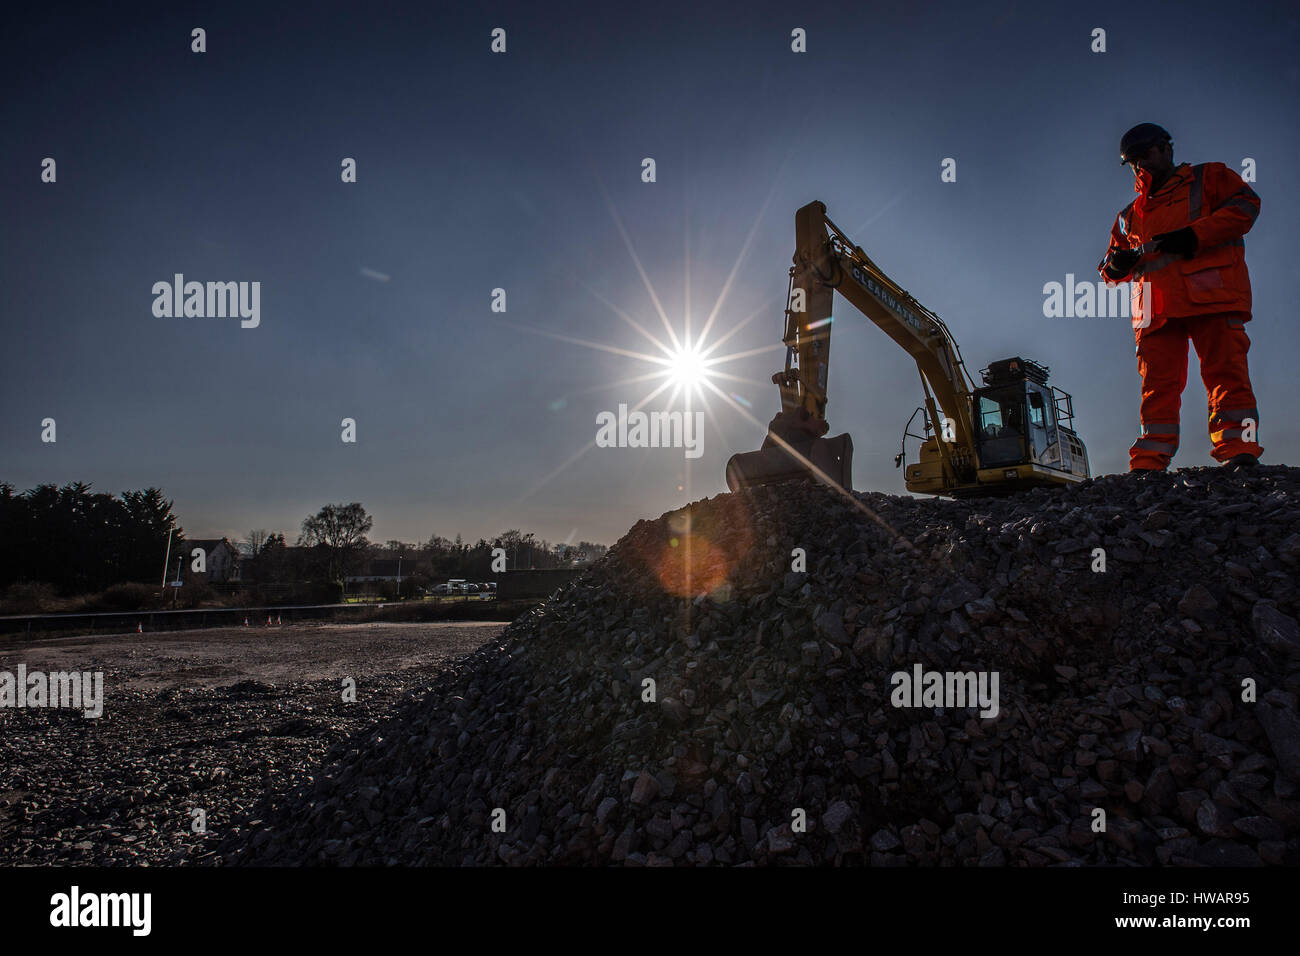 Construction Worker sillhouetted with digger in background Stock Photo